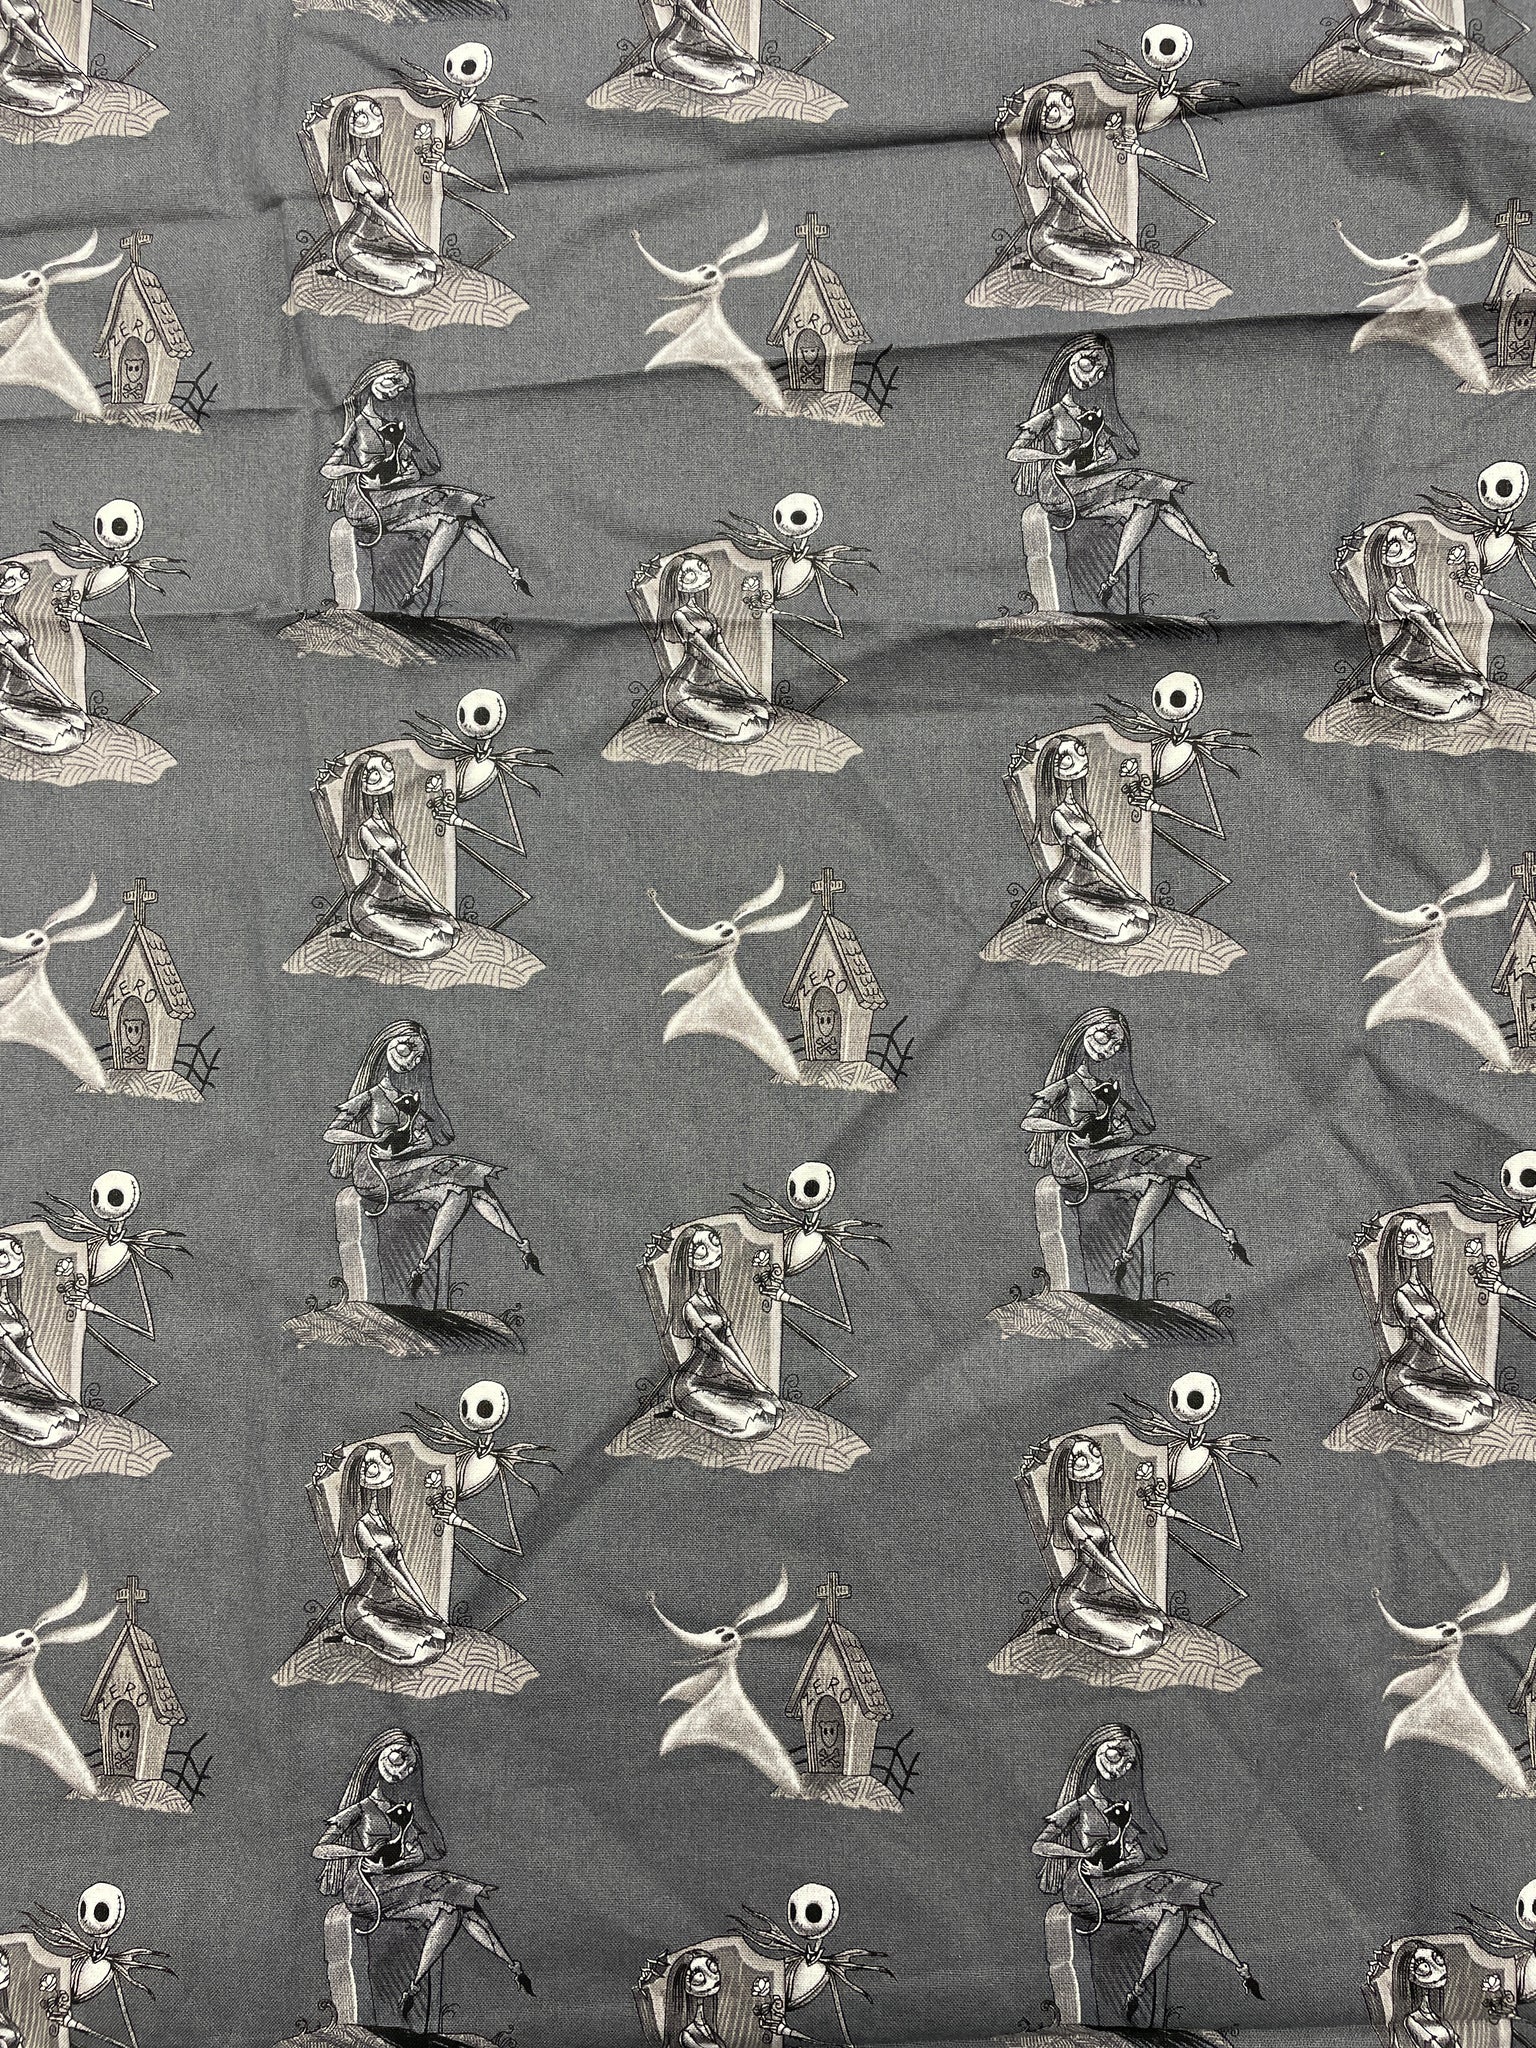 2020 3 YD Quilting Cotton - Gray with "Nightmare Before Christmas" Characters